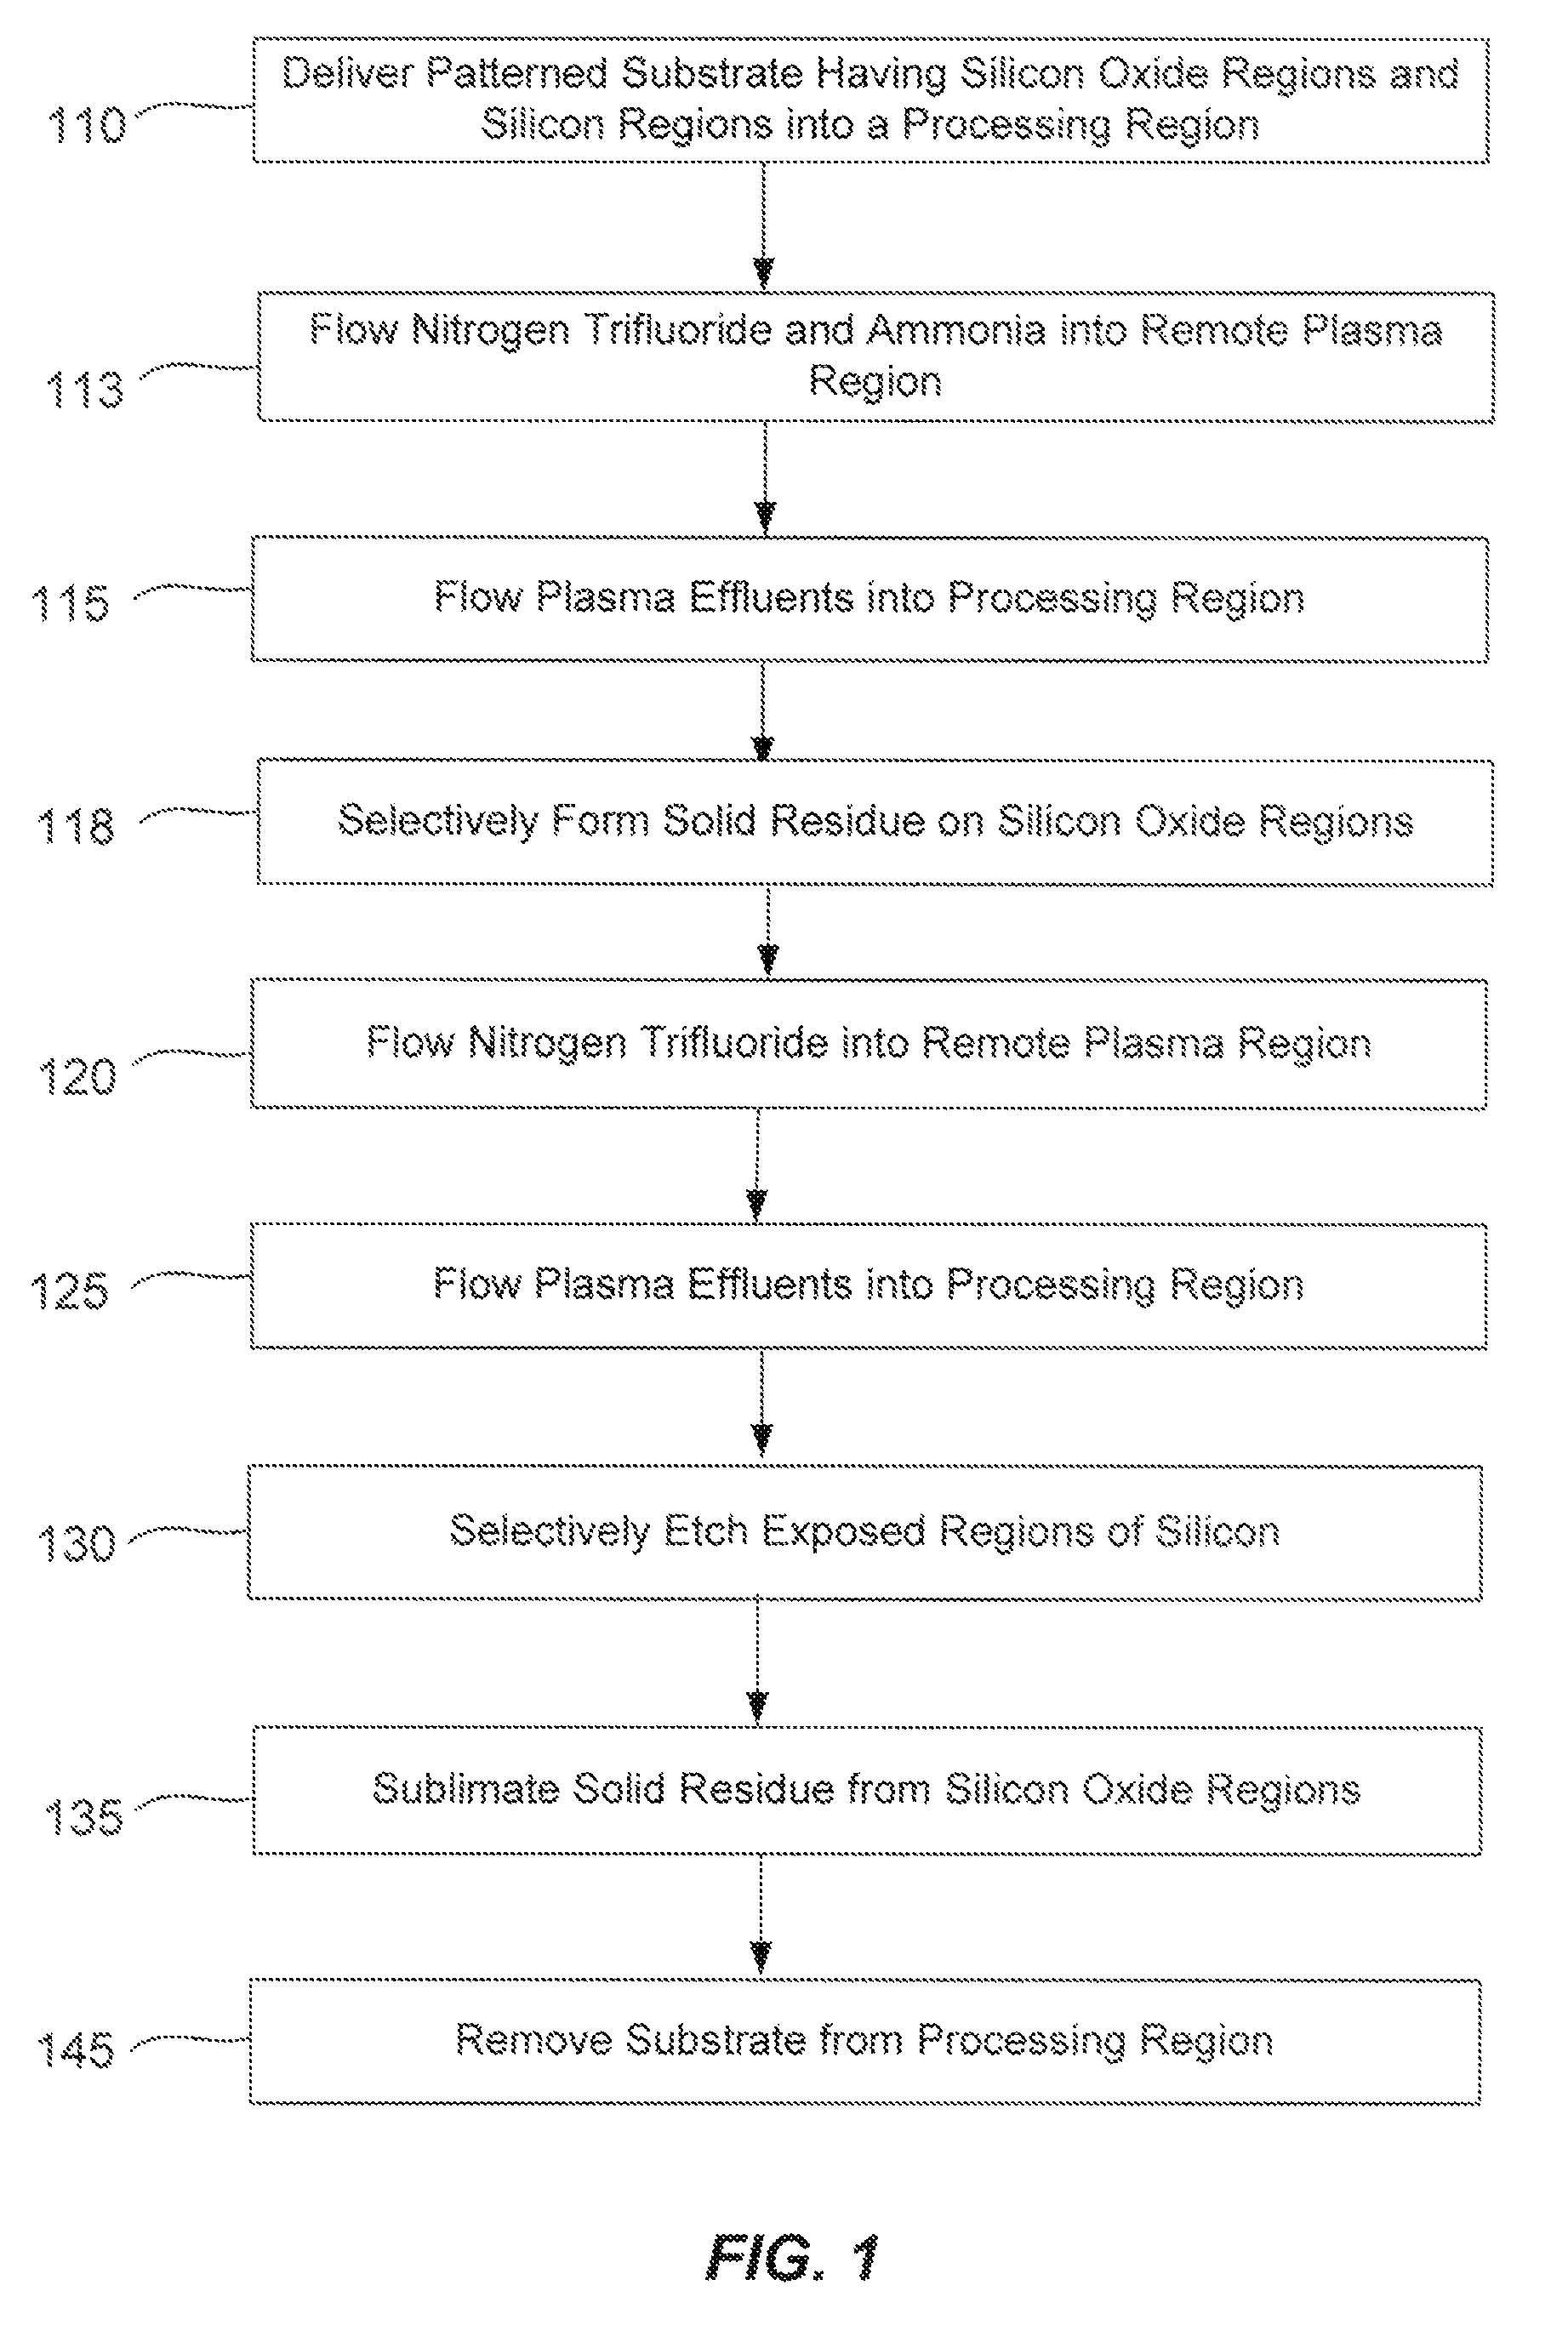 Selective suppression of dry-etch rate of materials containing both silicon and oxygen